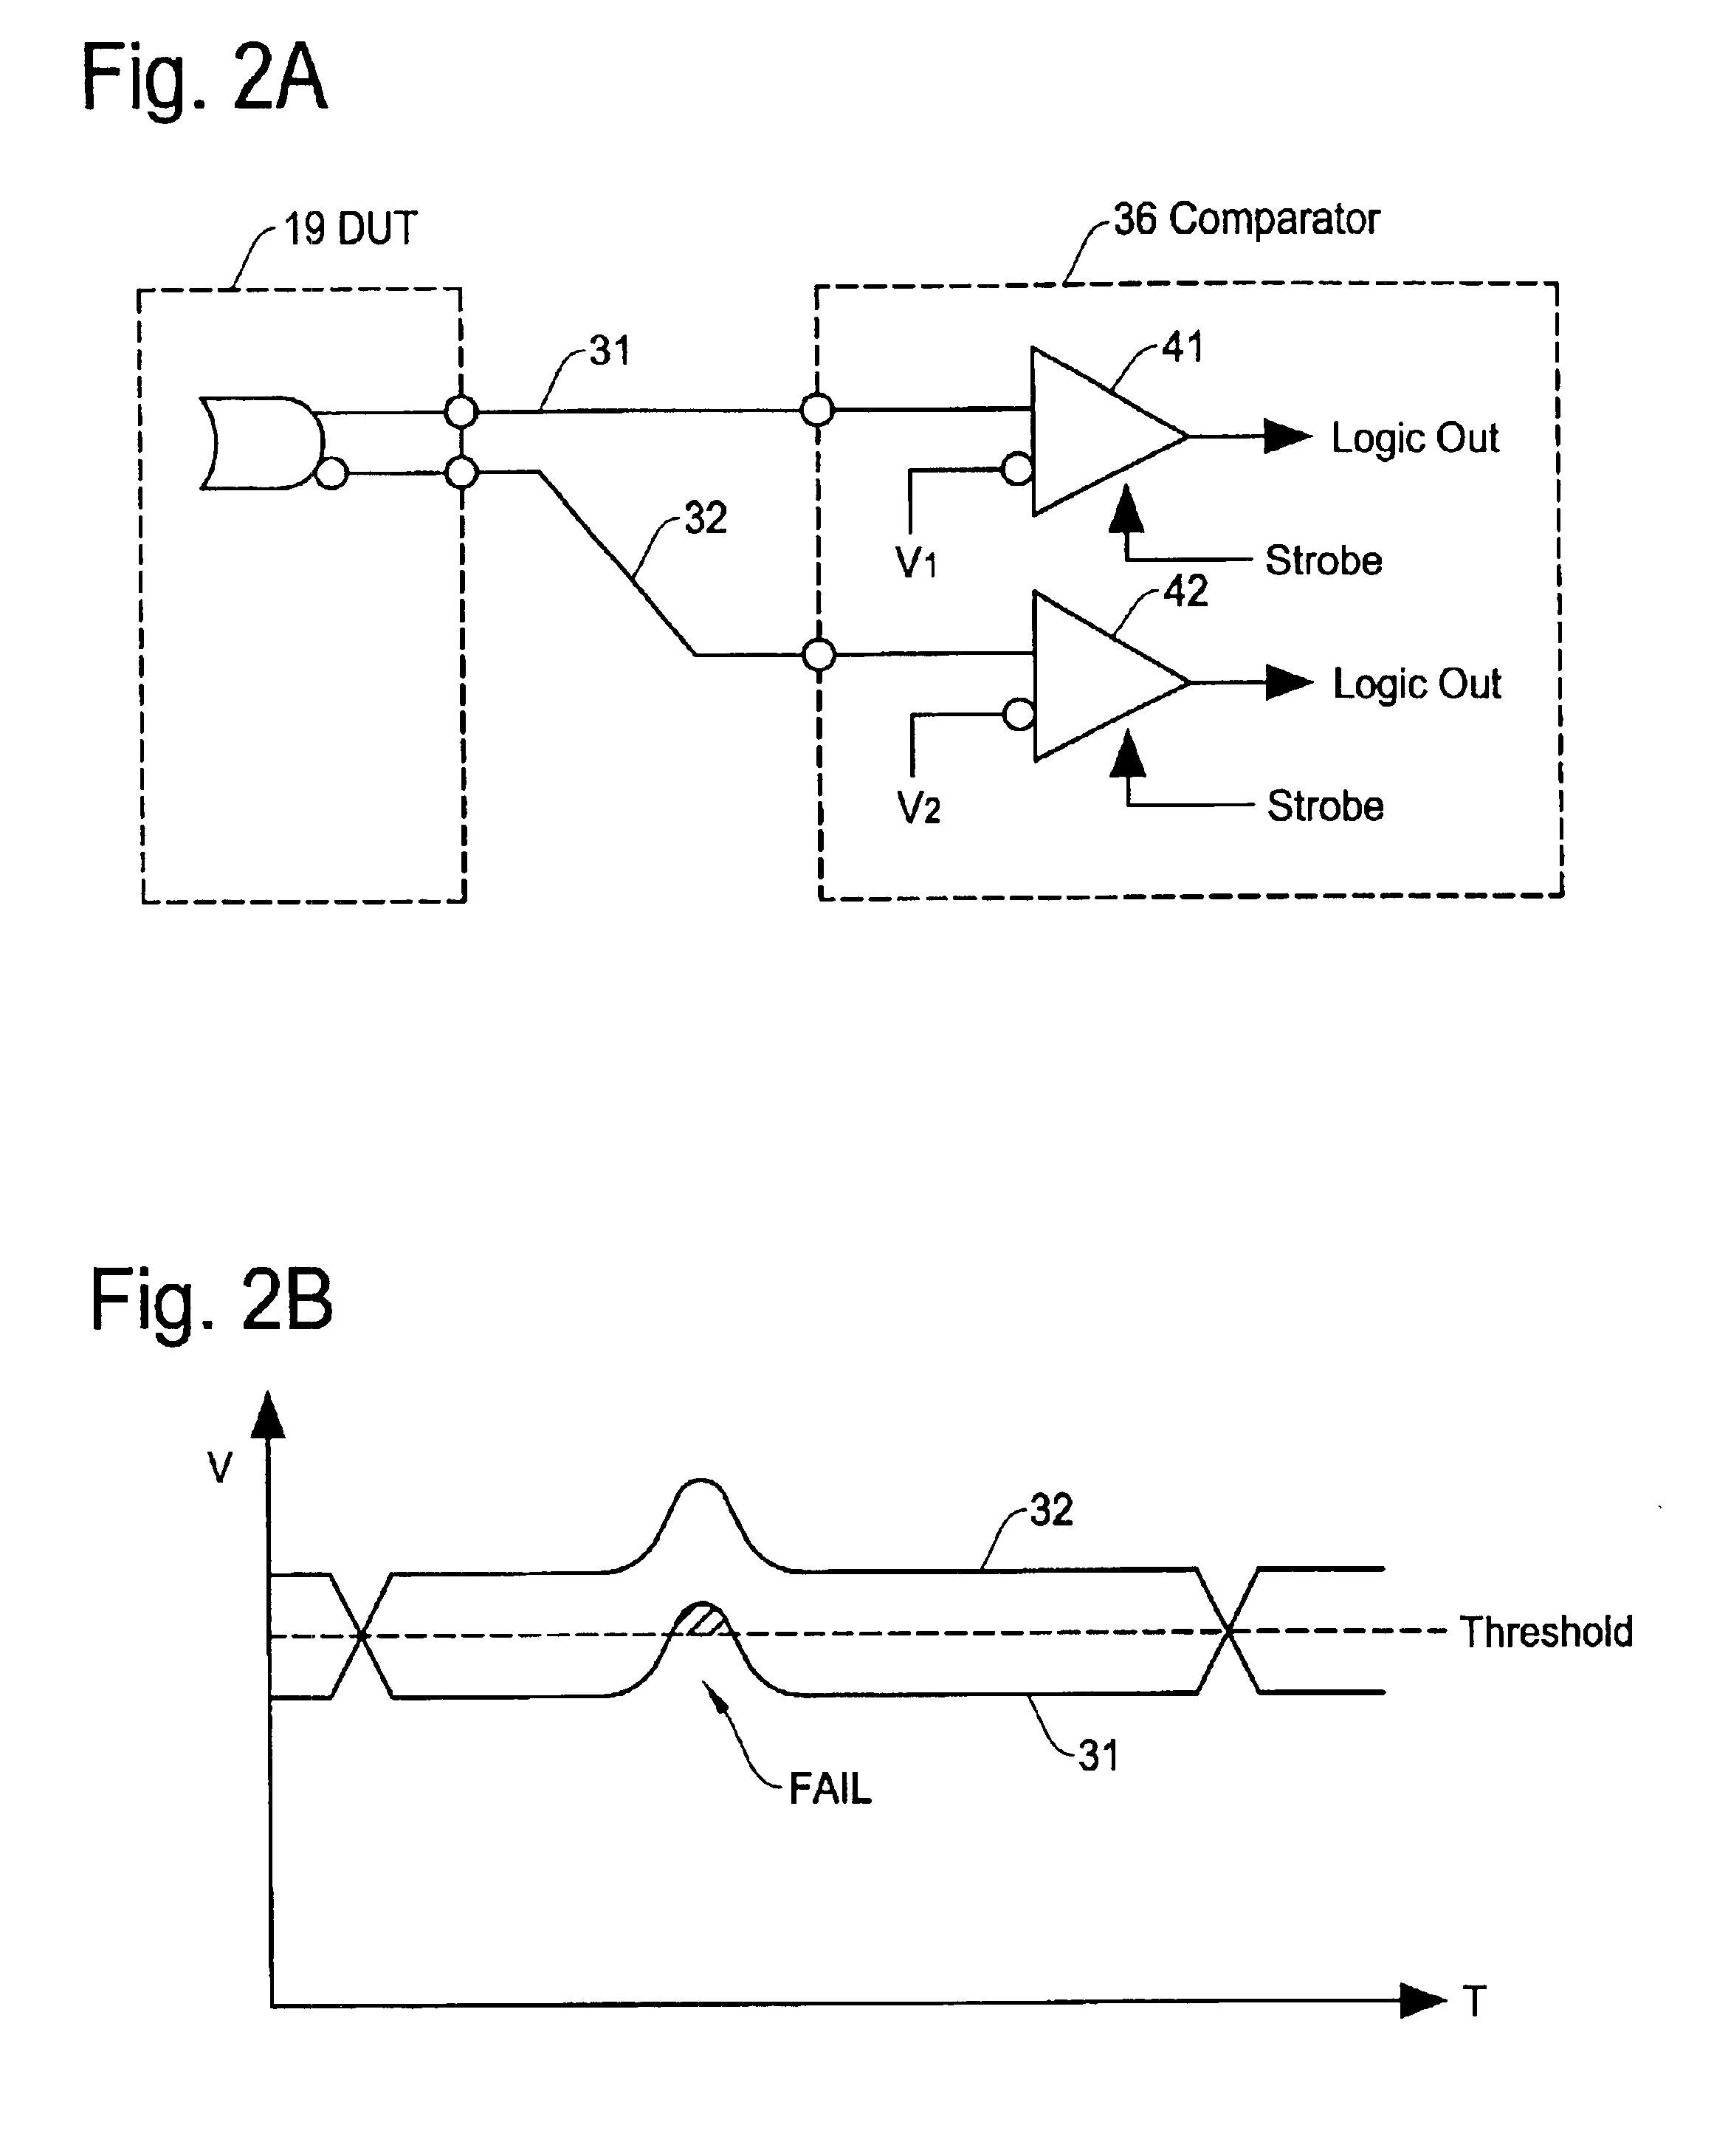 Comparator circuit for semiconductor test system